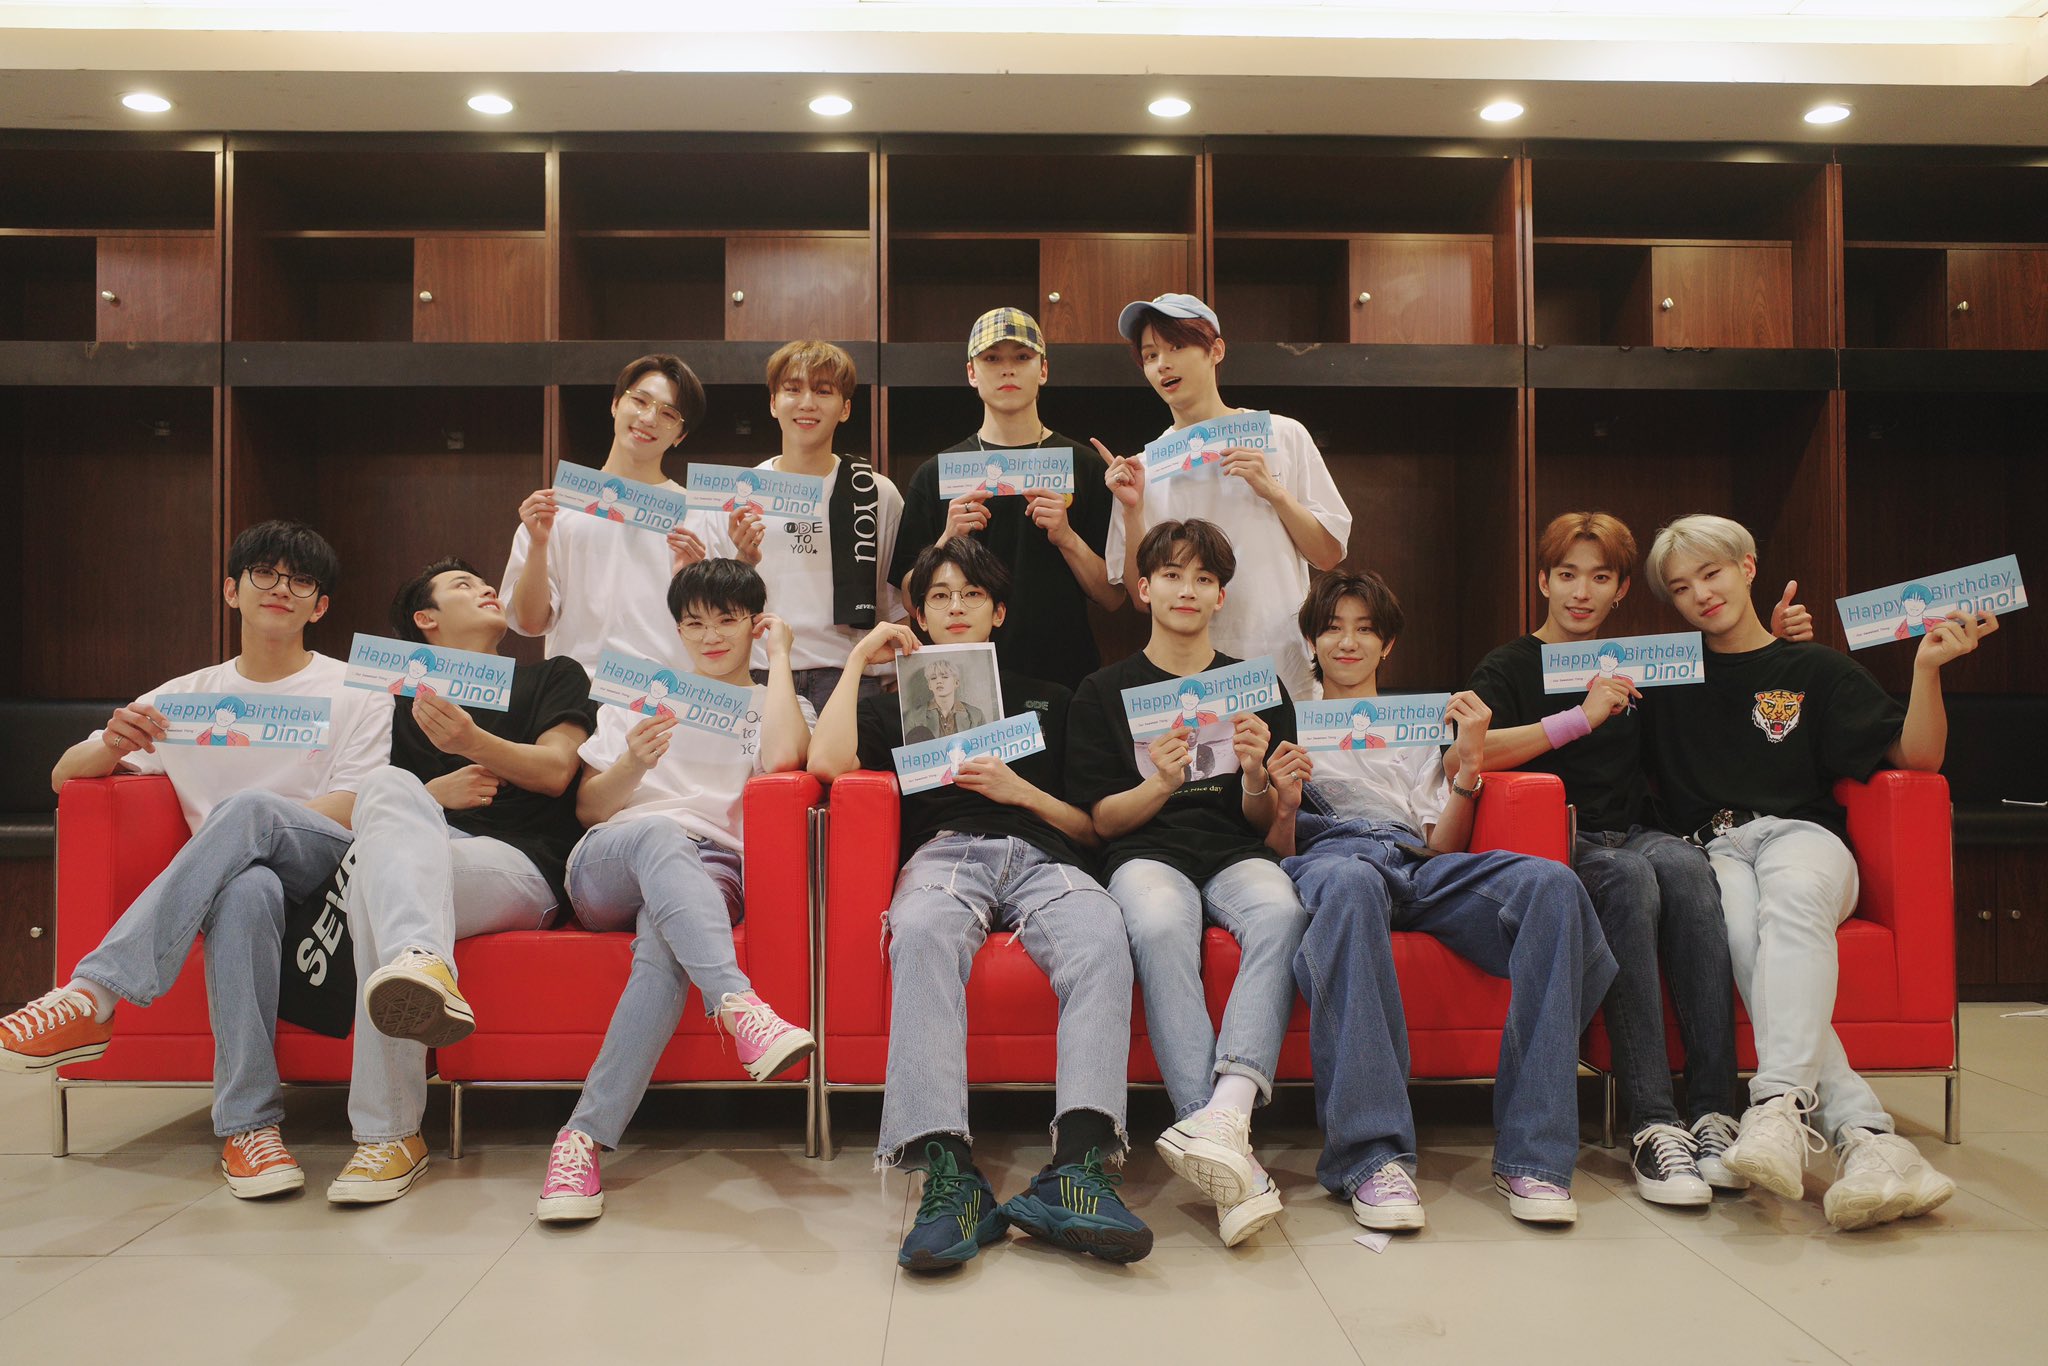 Holding banners to celebrate the birthday of “maknae” (youngest) Dino, the members also pose with a photo of leader S.Coups, who is still on hiatus. —SEVENTEEN OFFICIAL TWITTER